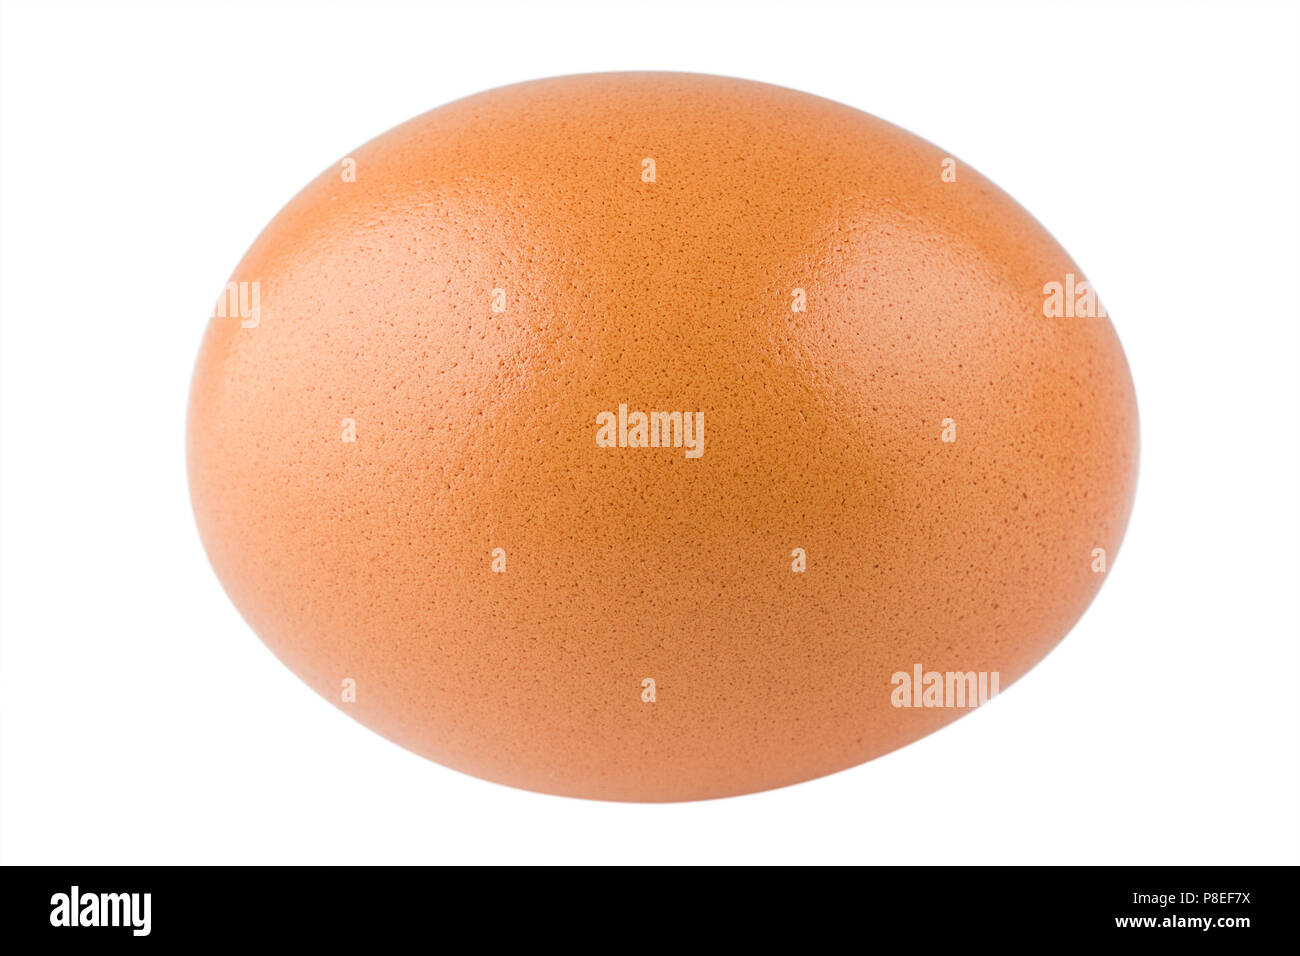 Chicken egg lies on a white background, isolated Stock Photo